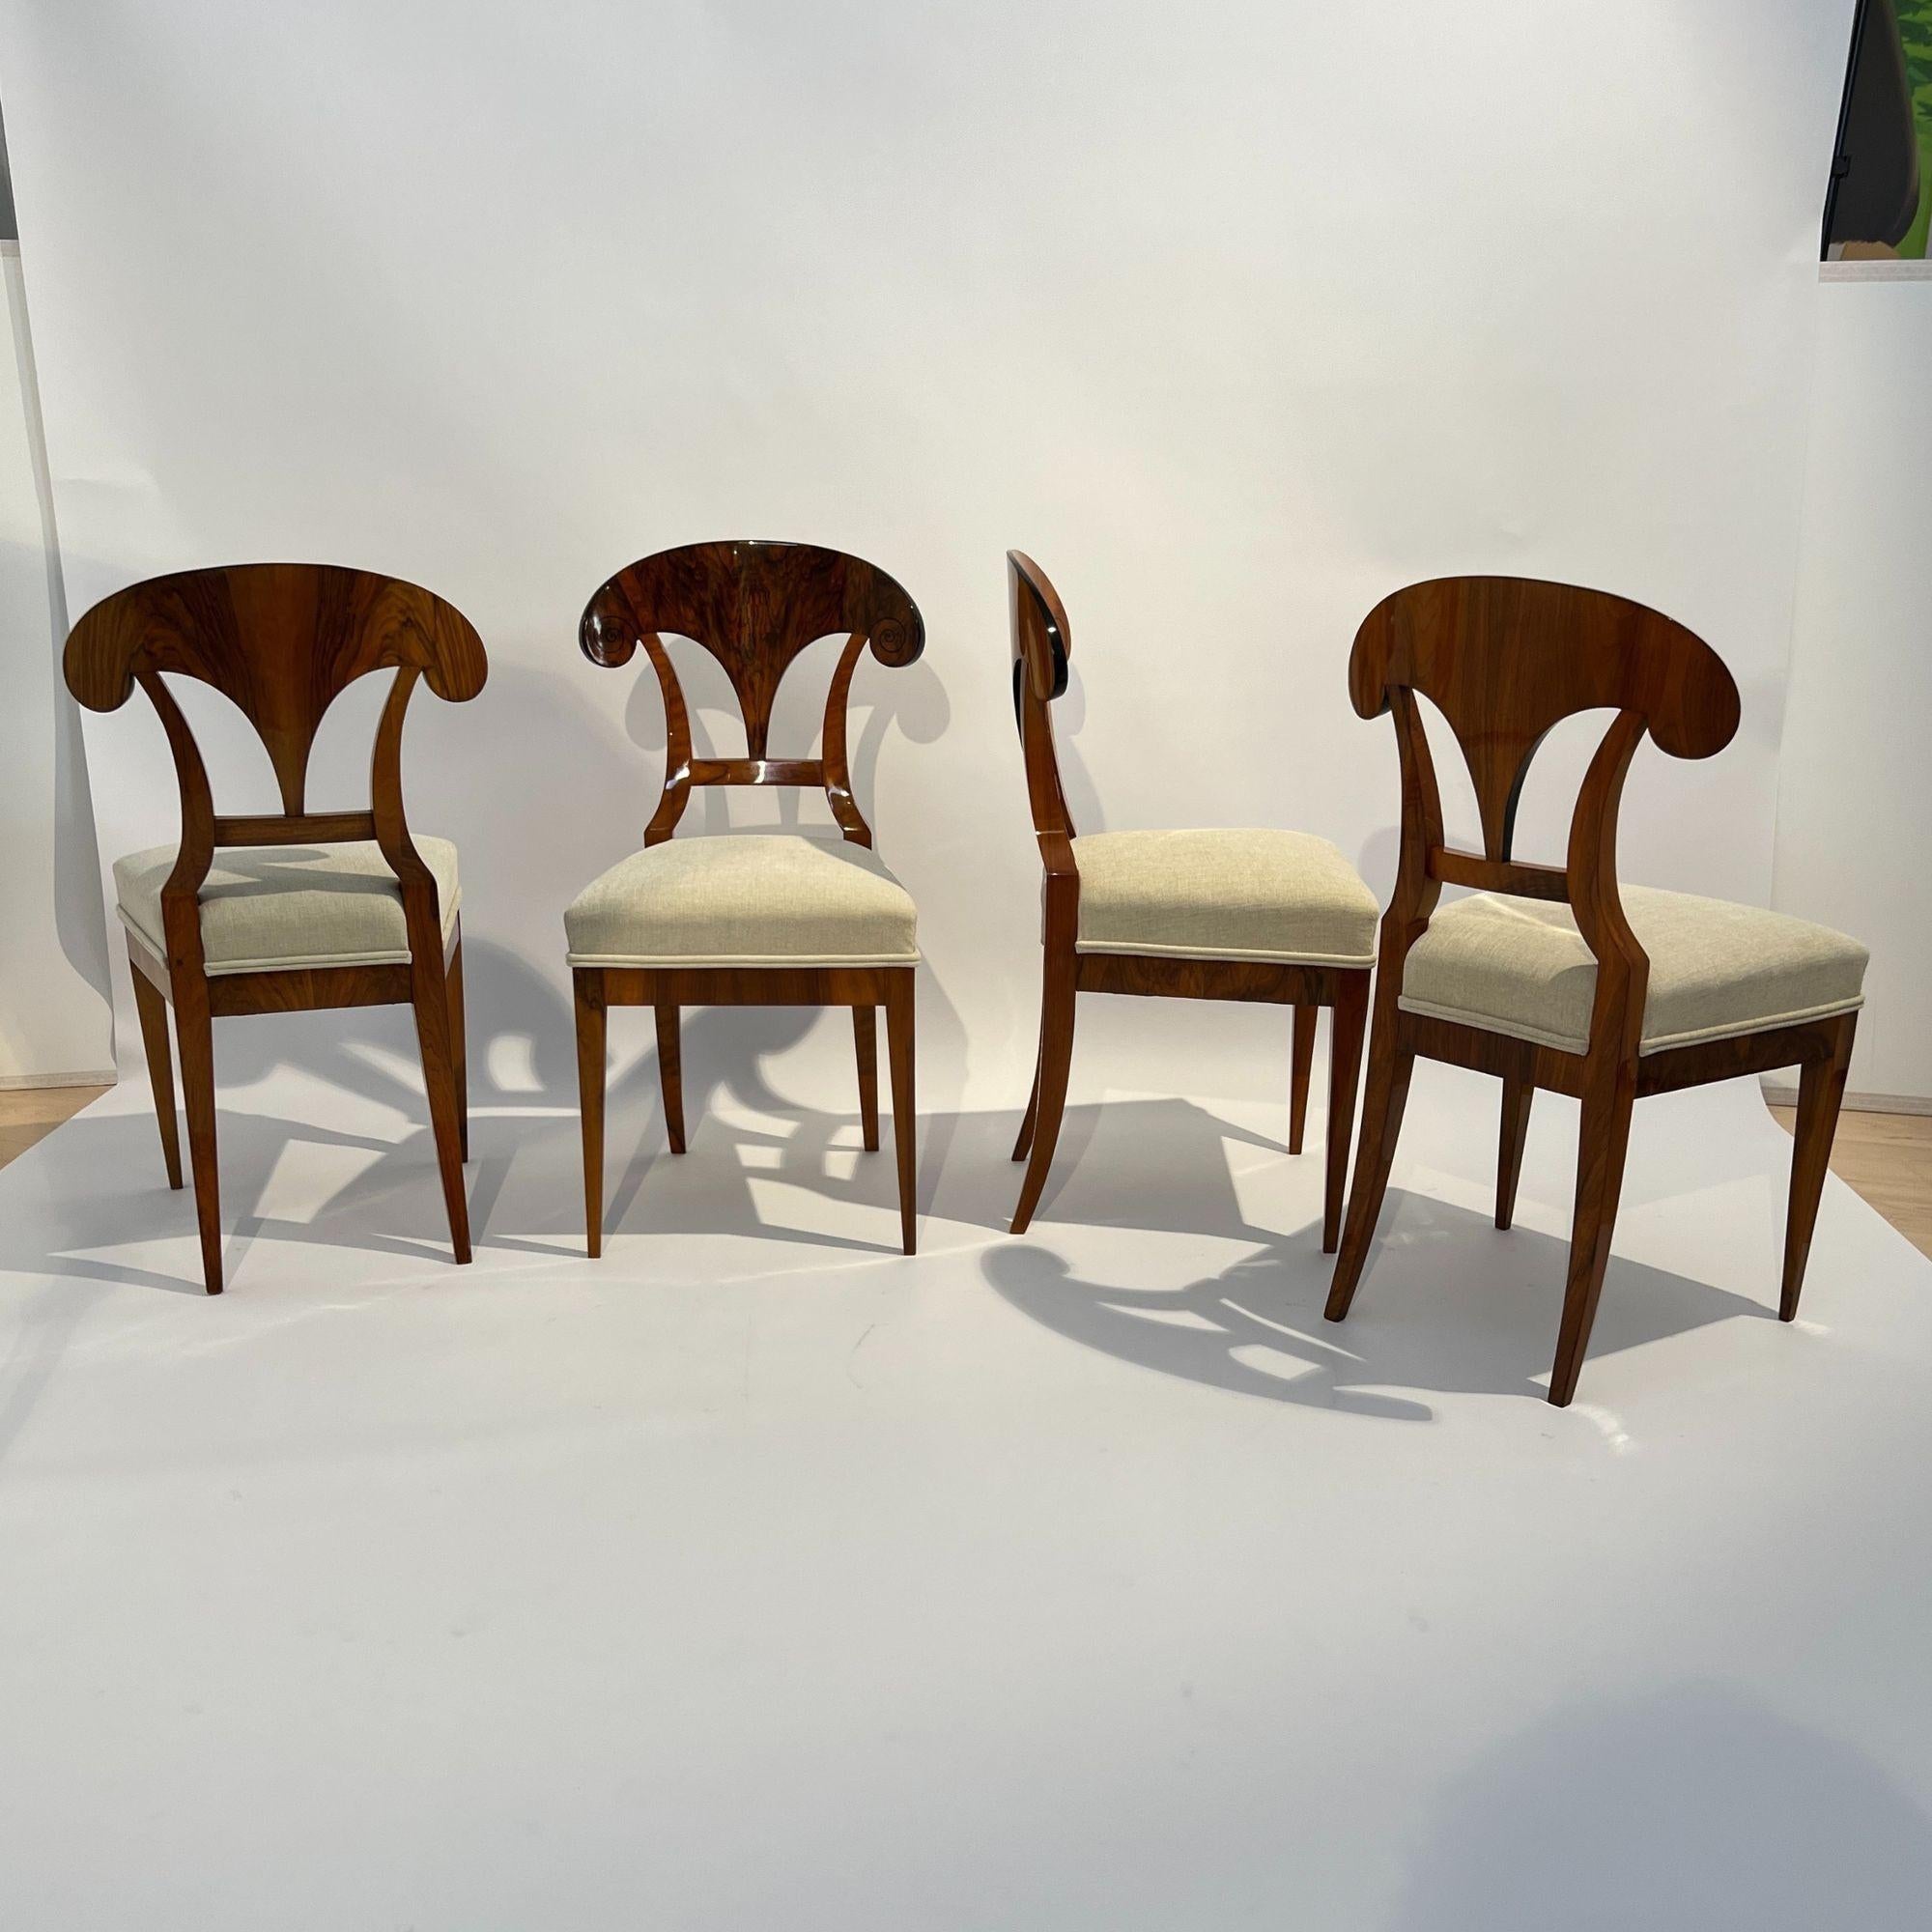 Classic, elegant set of four antique Biedermeier shovel chairs in walnut from Austria around 1830.
Walnut book-matched veneered and solid walnut. Original spirals painted with ink on the sides of the backboard.
Ebonized outside and inside edge of